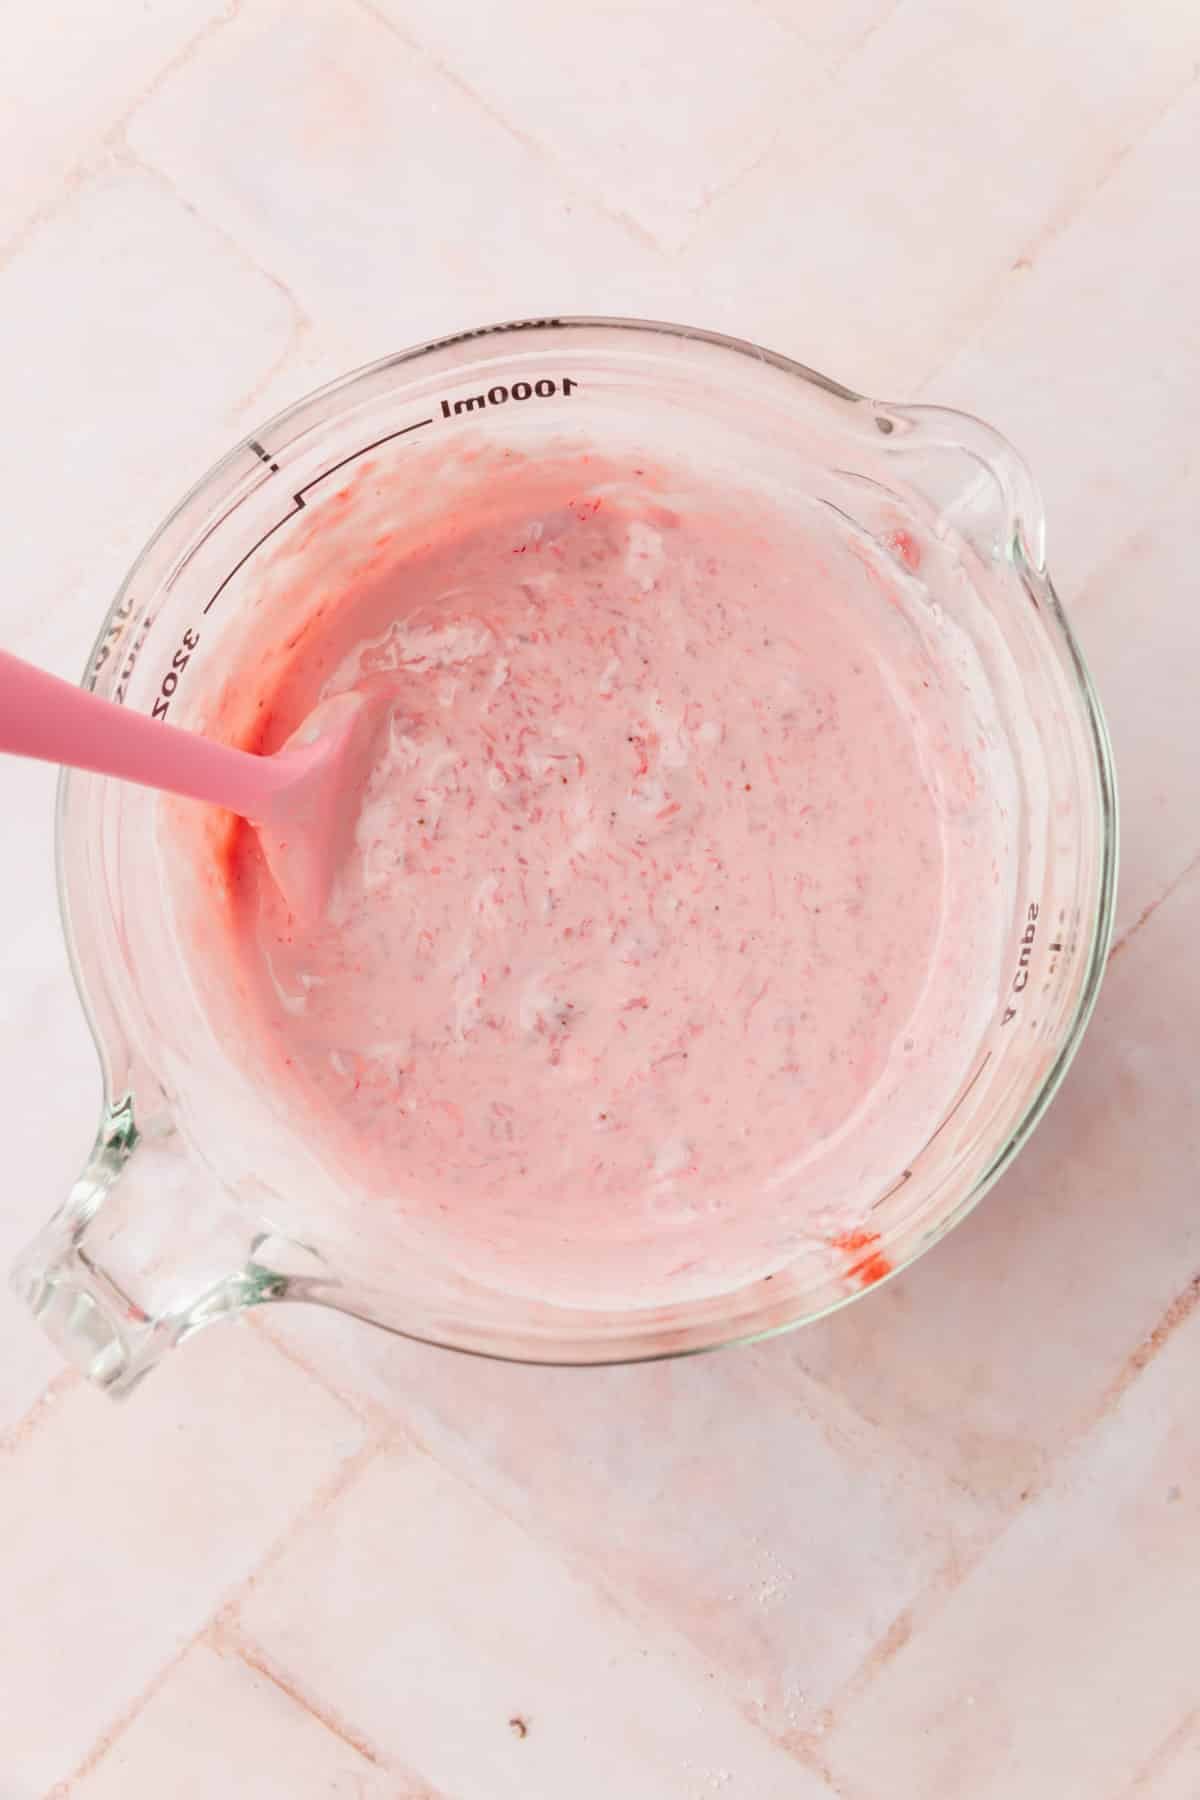 A glass measuring cup with a strawberry sour cream mixture in it with a pink spatula.